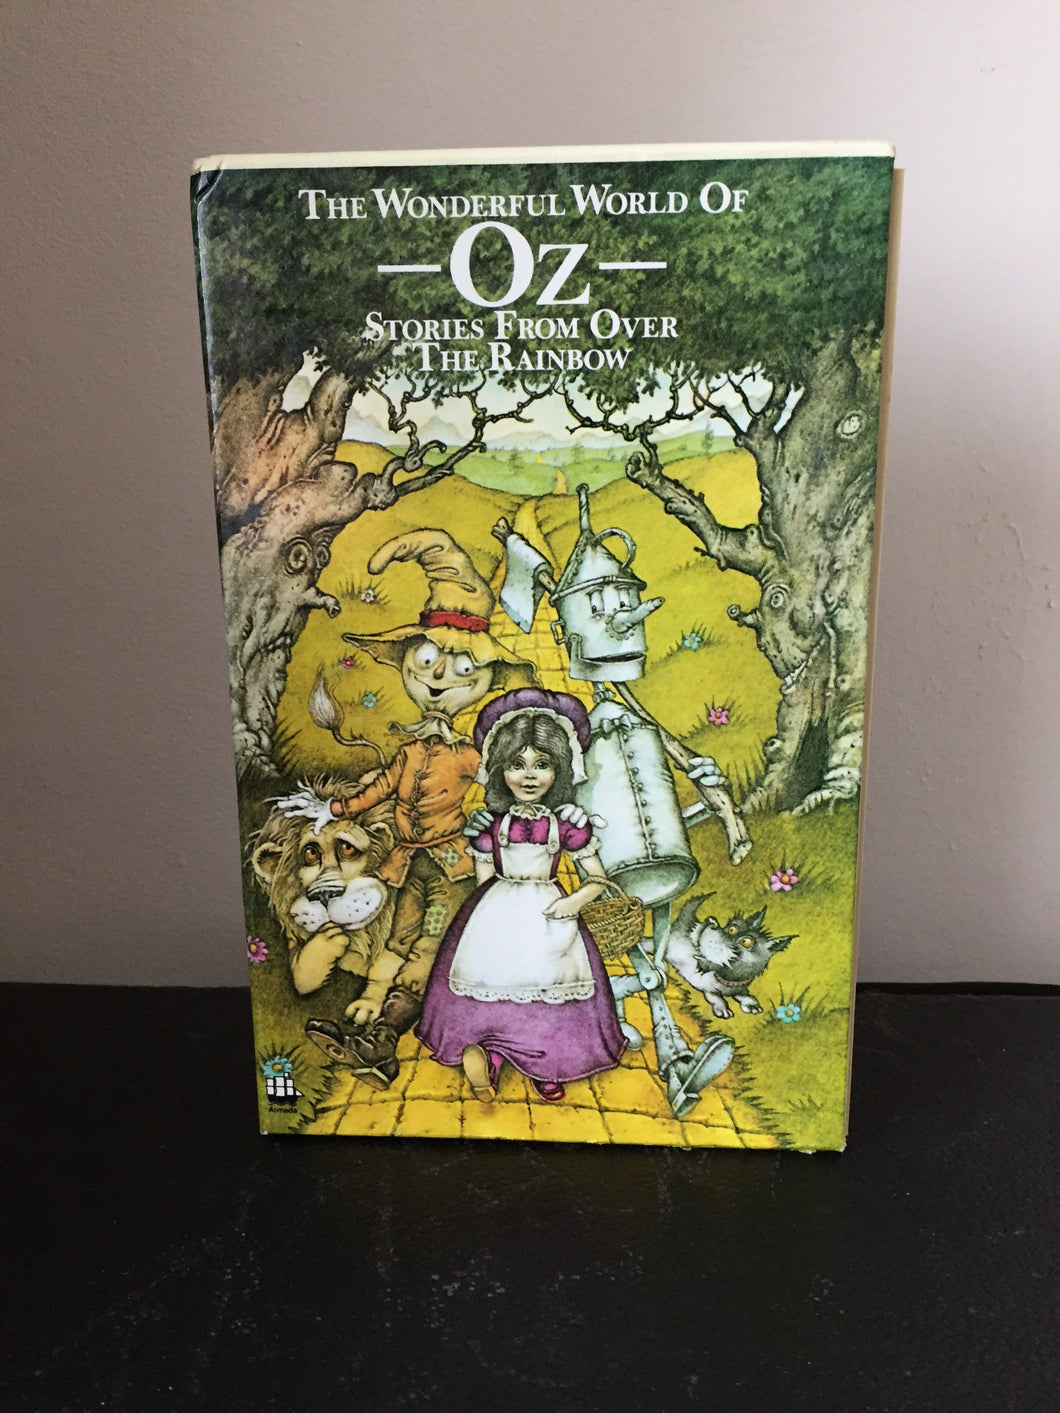 The Wonderful World of Oz. Stories From Over The Rainbow. 4 volume box-set